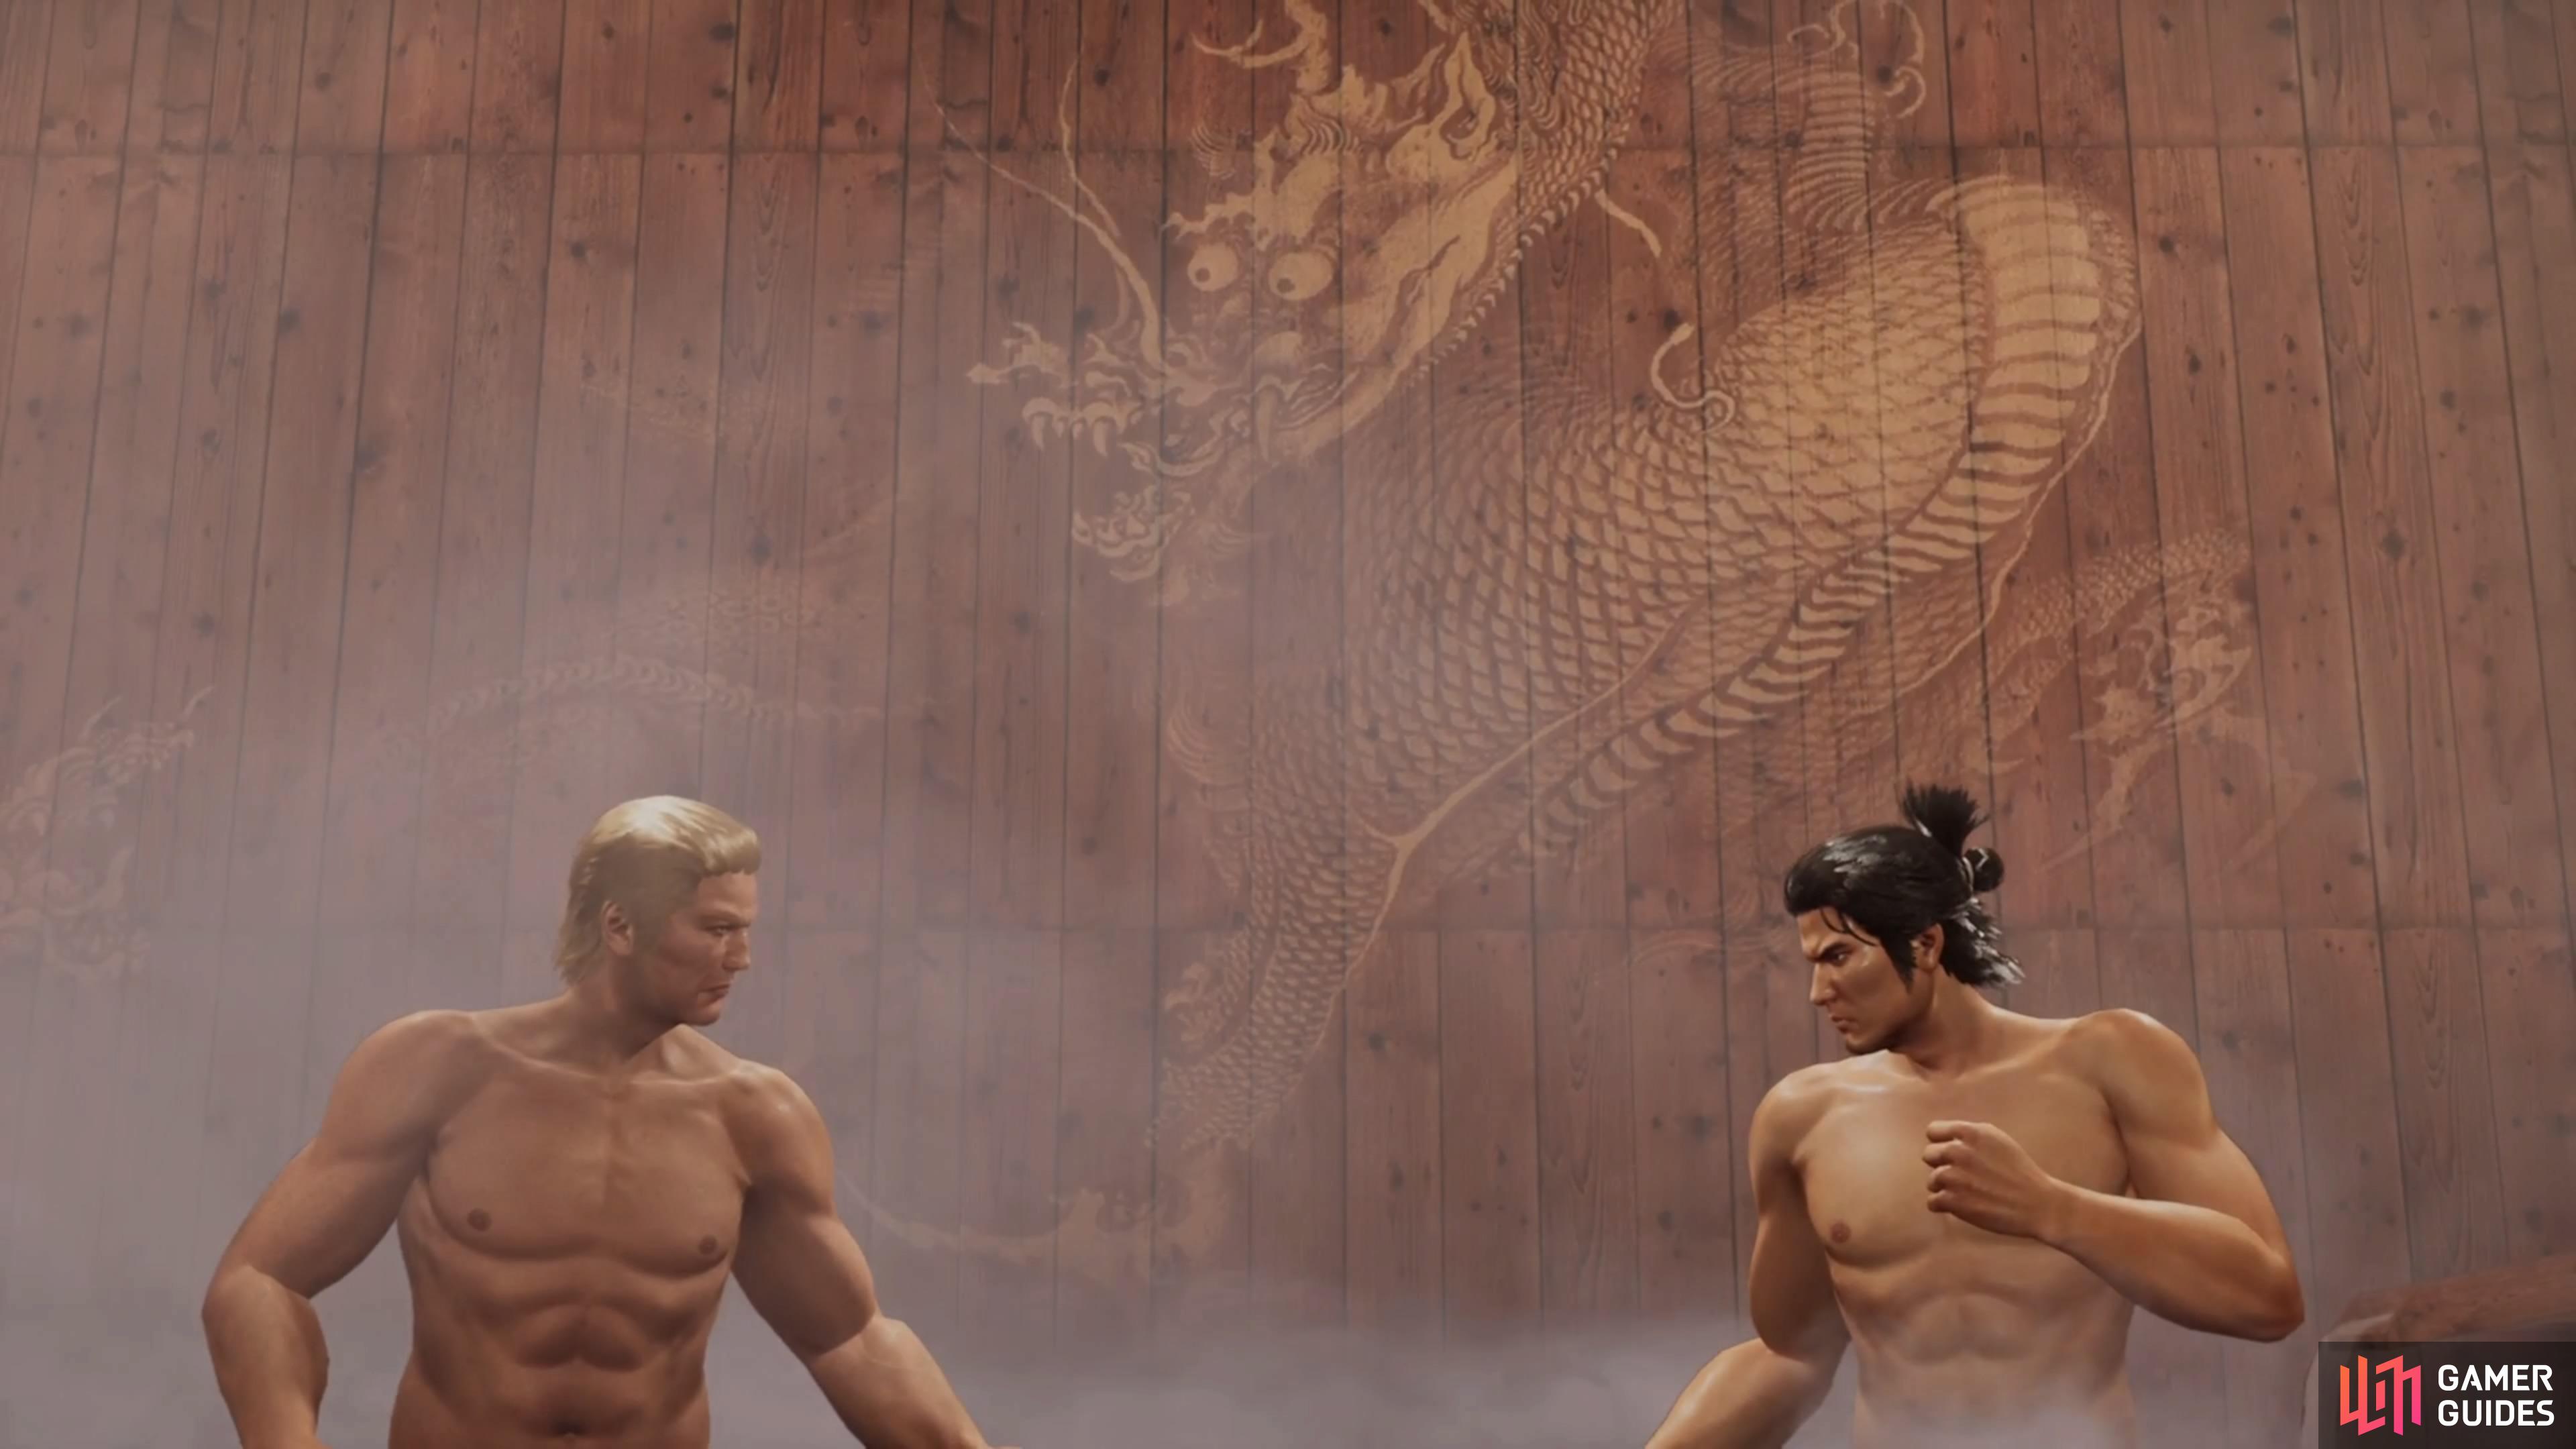 Yep, it’s a one-on-one fight, in a bathhouse